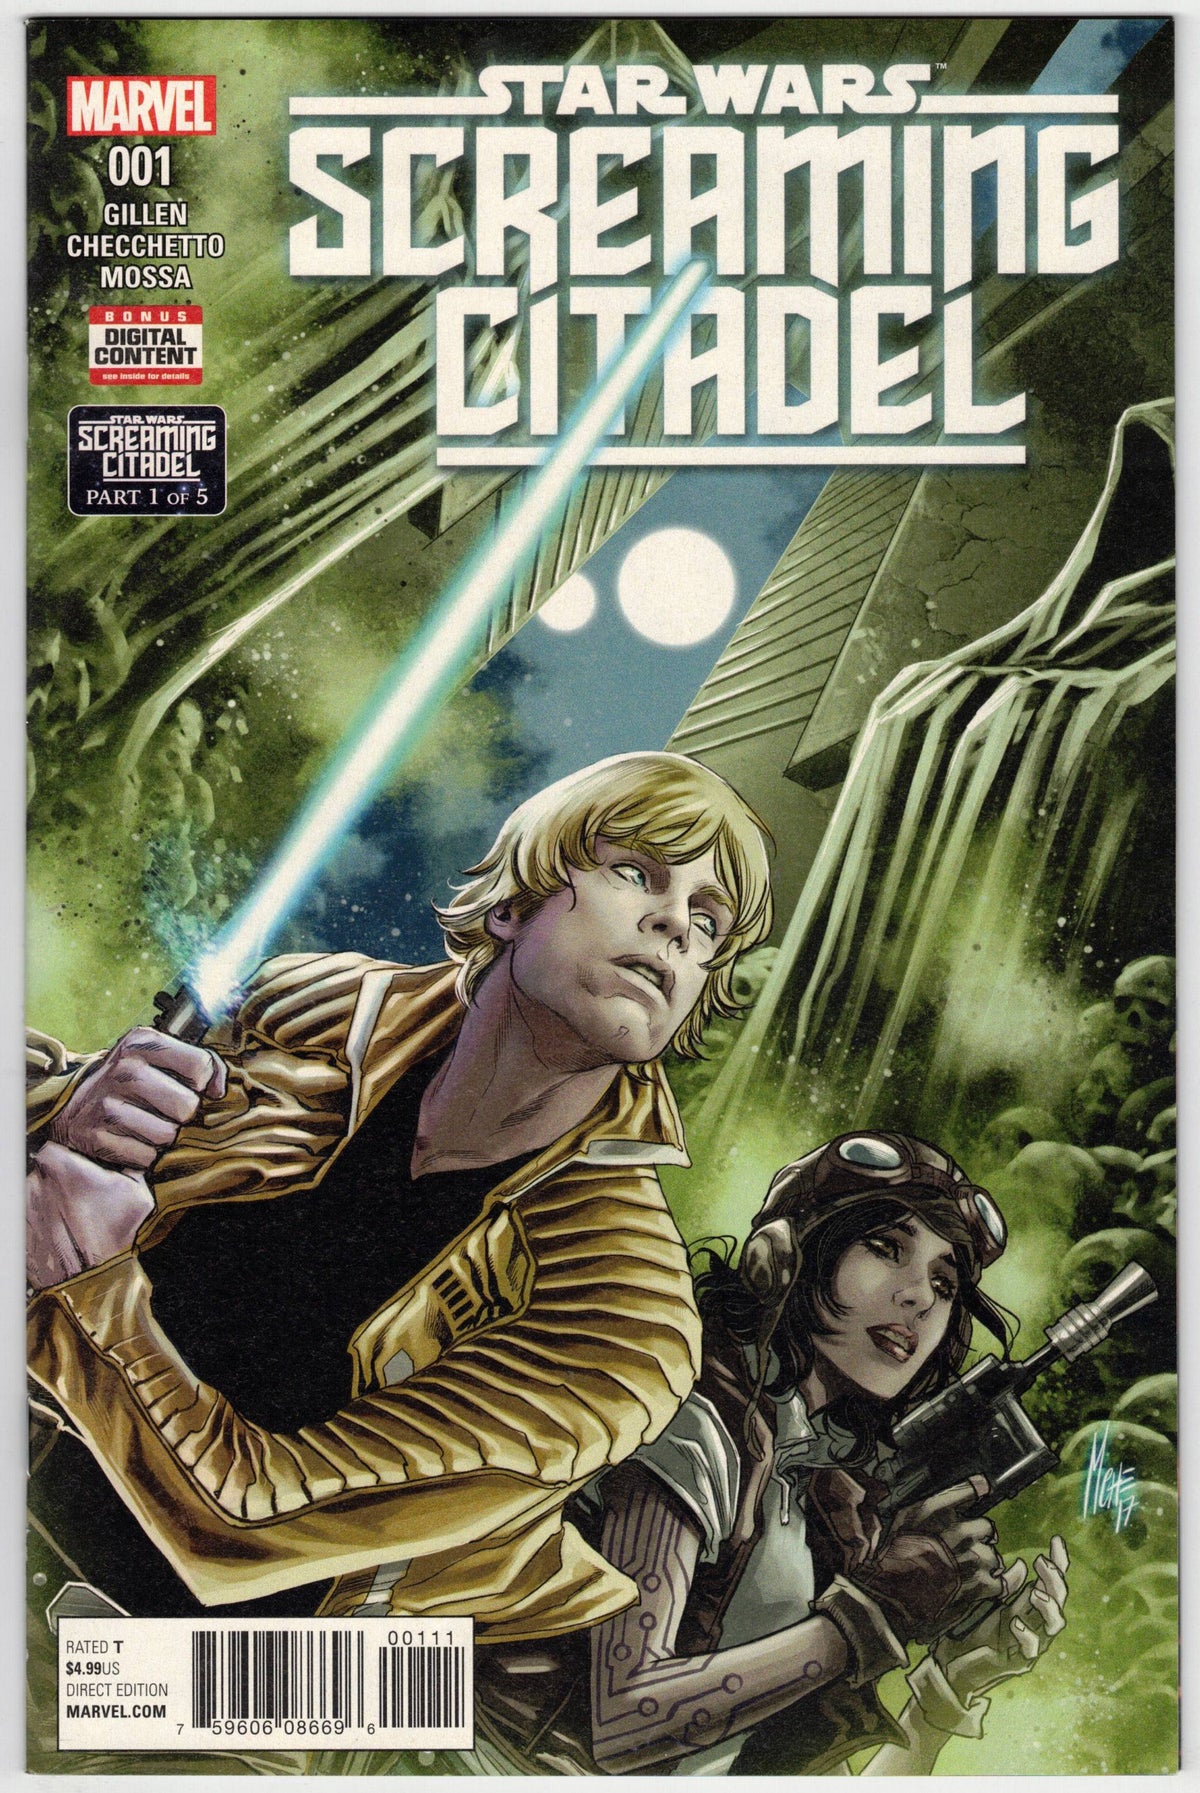 Photo of Star Wars: Screaming Citadel (2017) Issue 1A - Near Mint Comic sold by Stronghold Collectibles